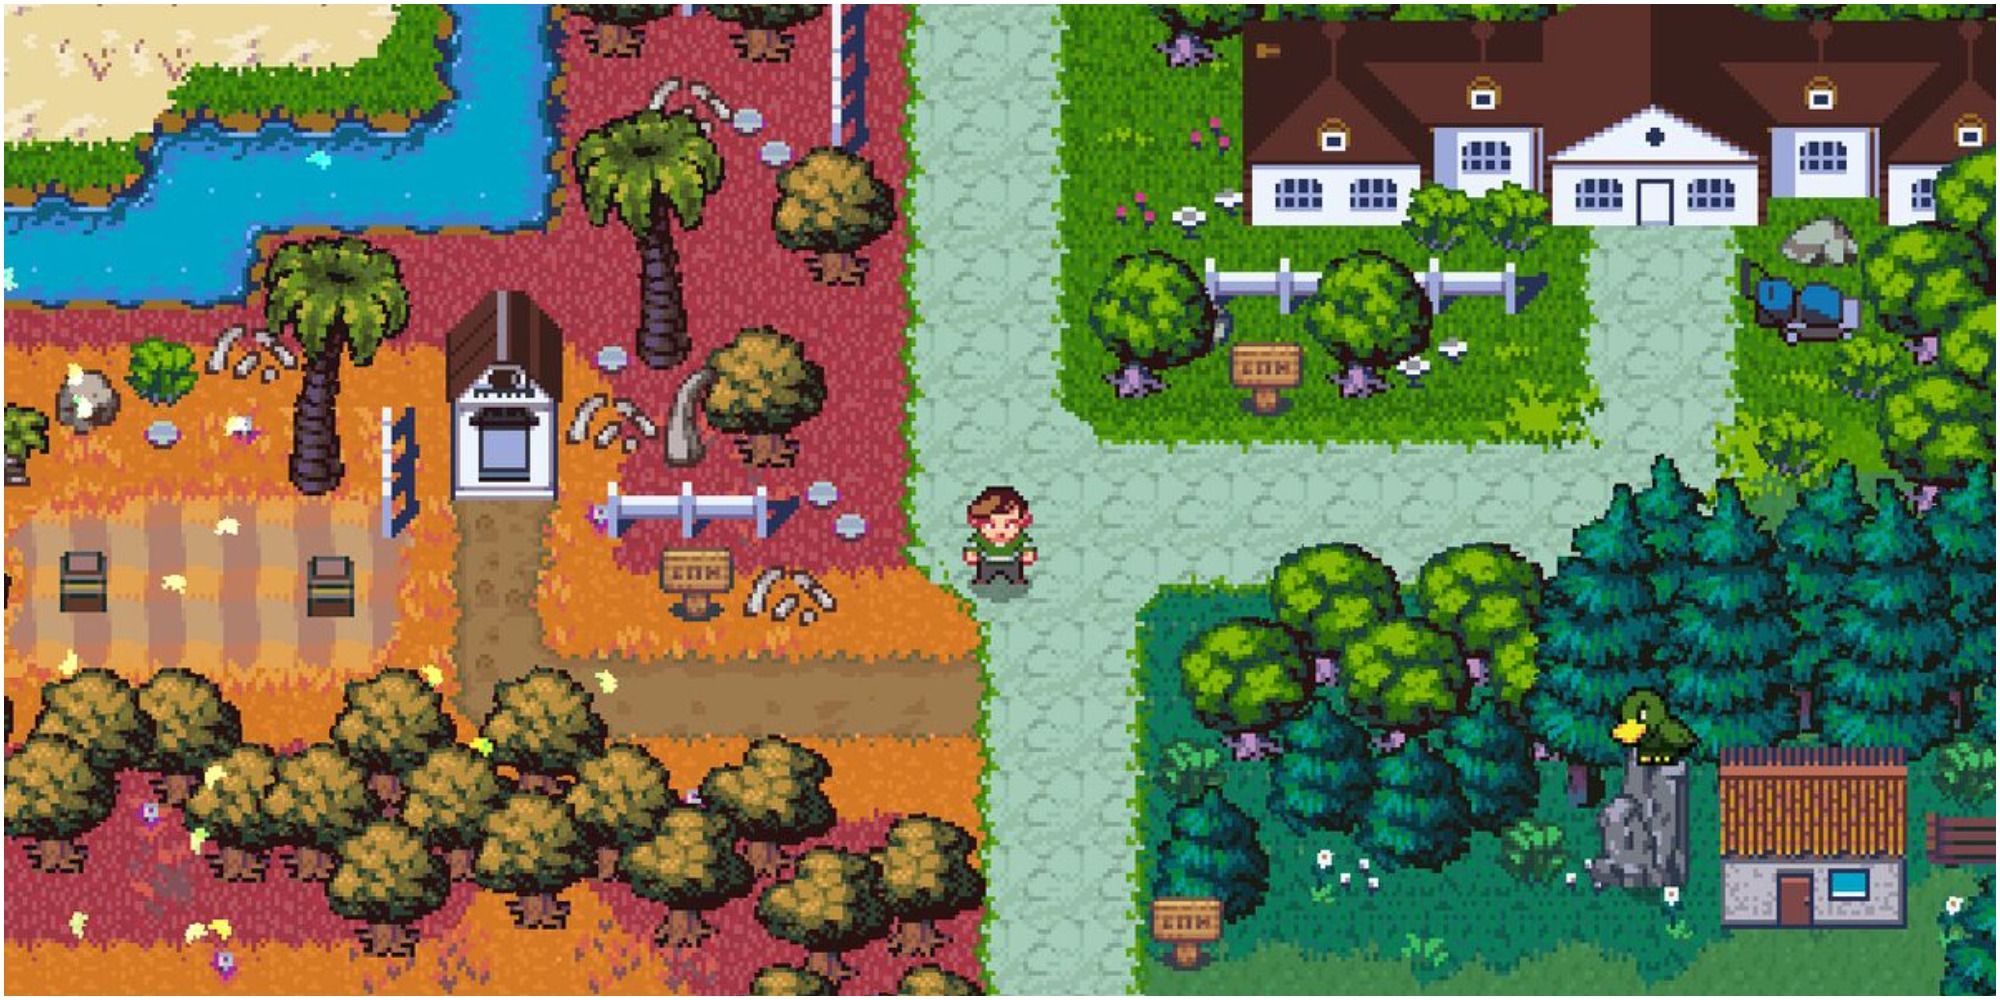 golf story character standing on road